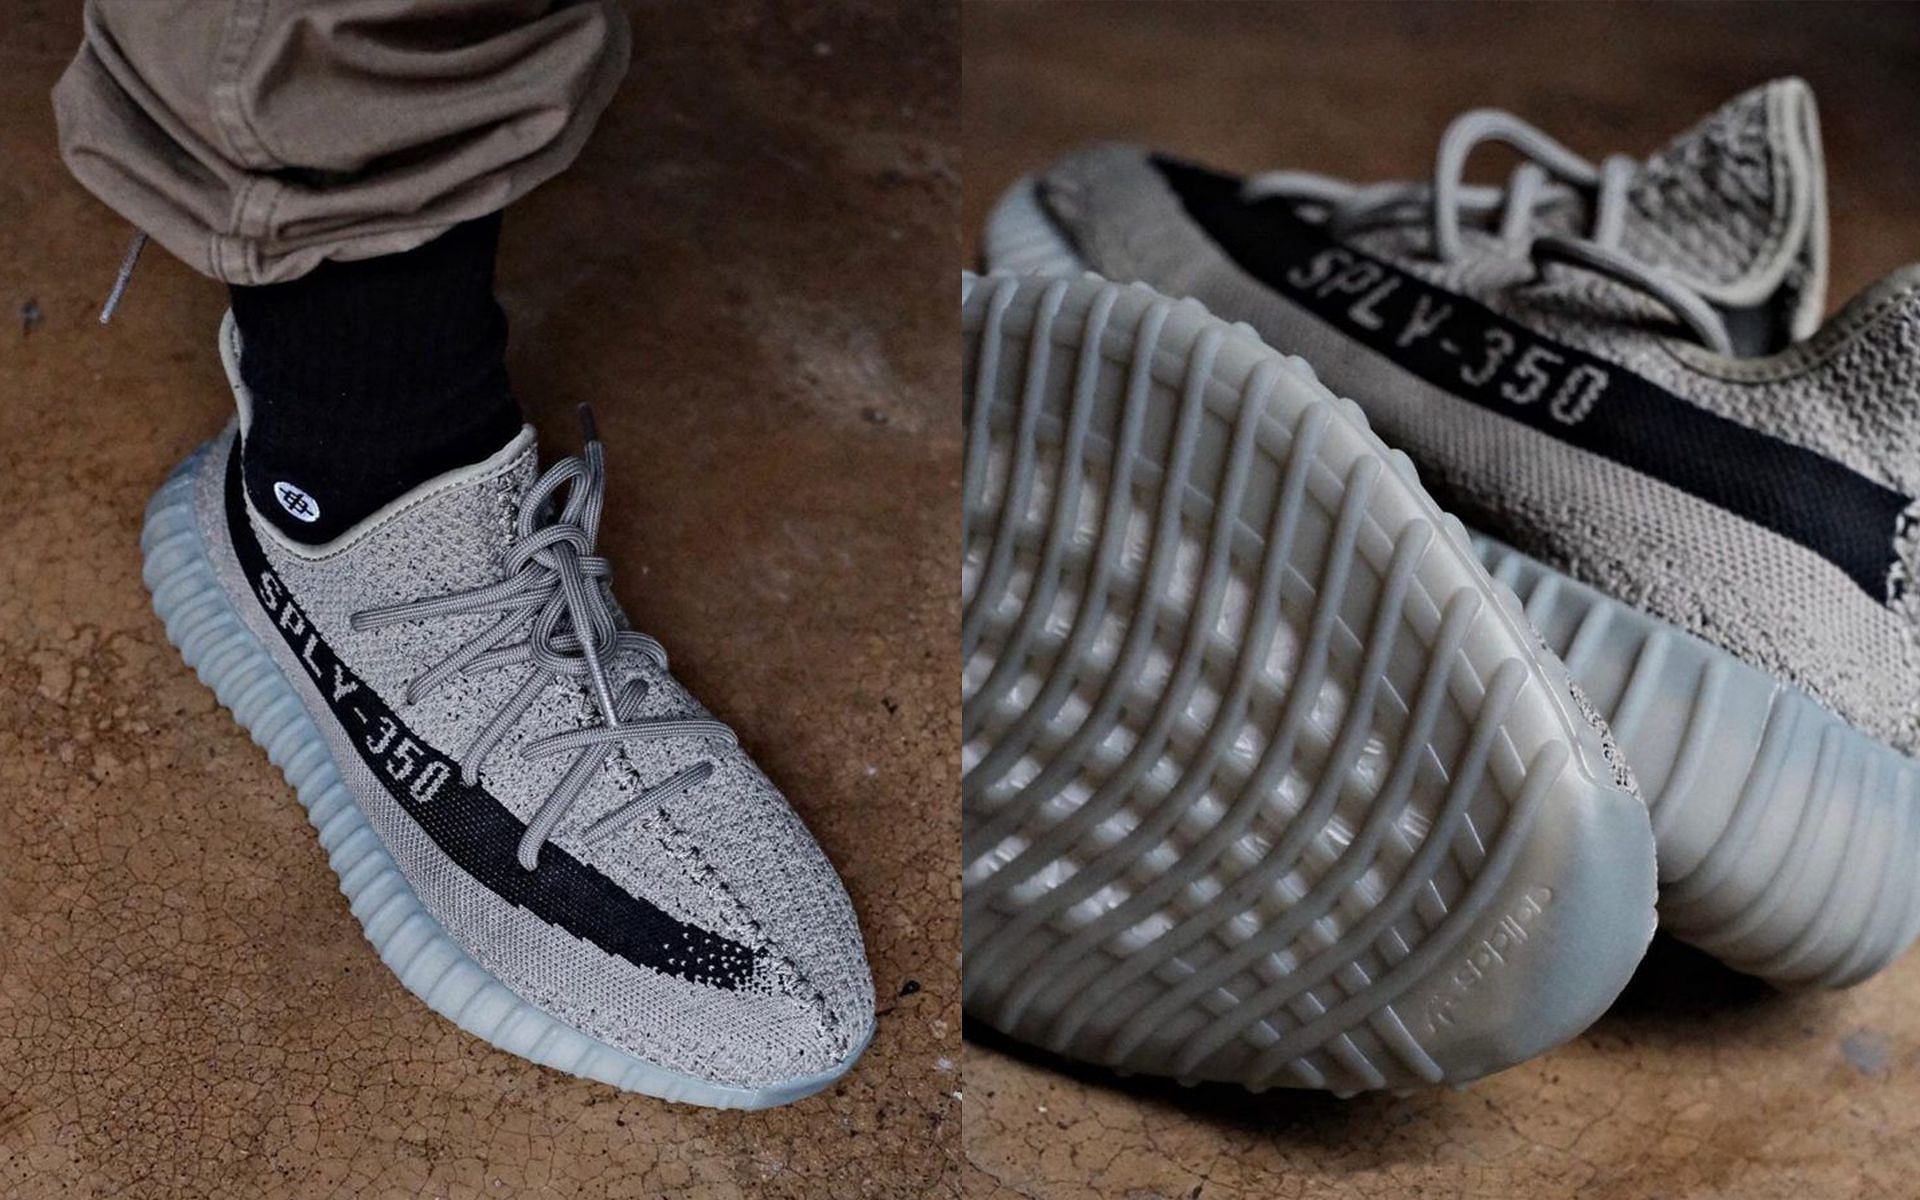 Where to buy Adidas Yeezy BOOST 350 V2 Granite shoes? Price and more ...